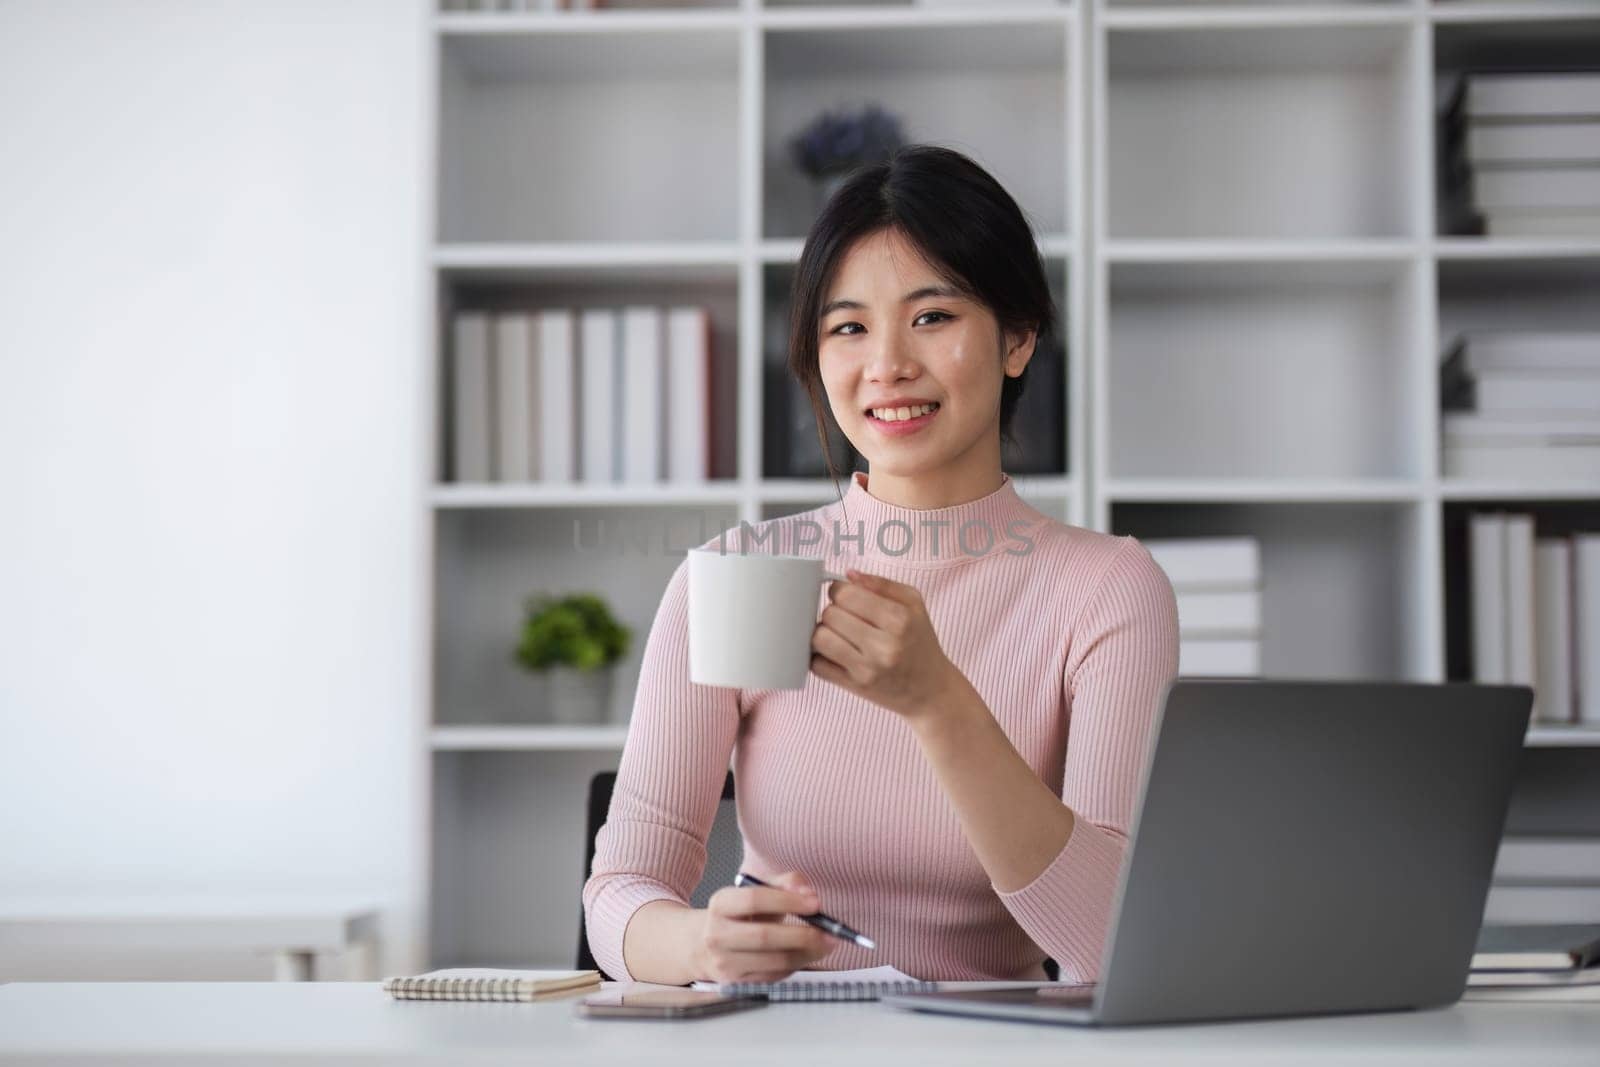 Young Asian woman uses laptop to complete financial transactions, financial planning and investments through online banking..